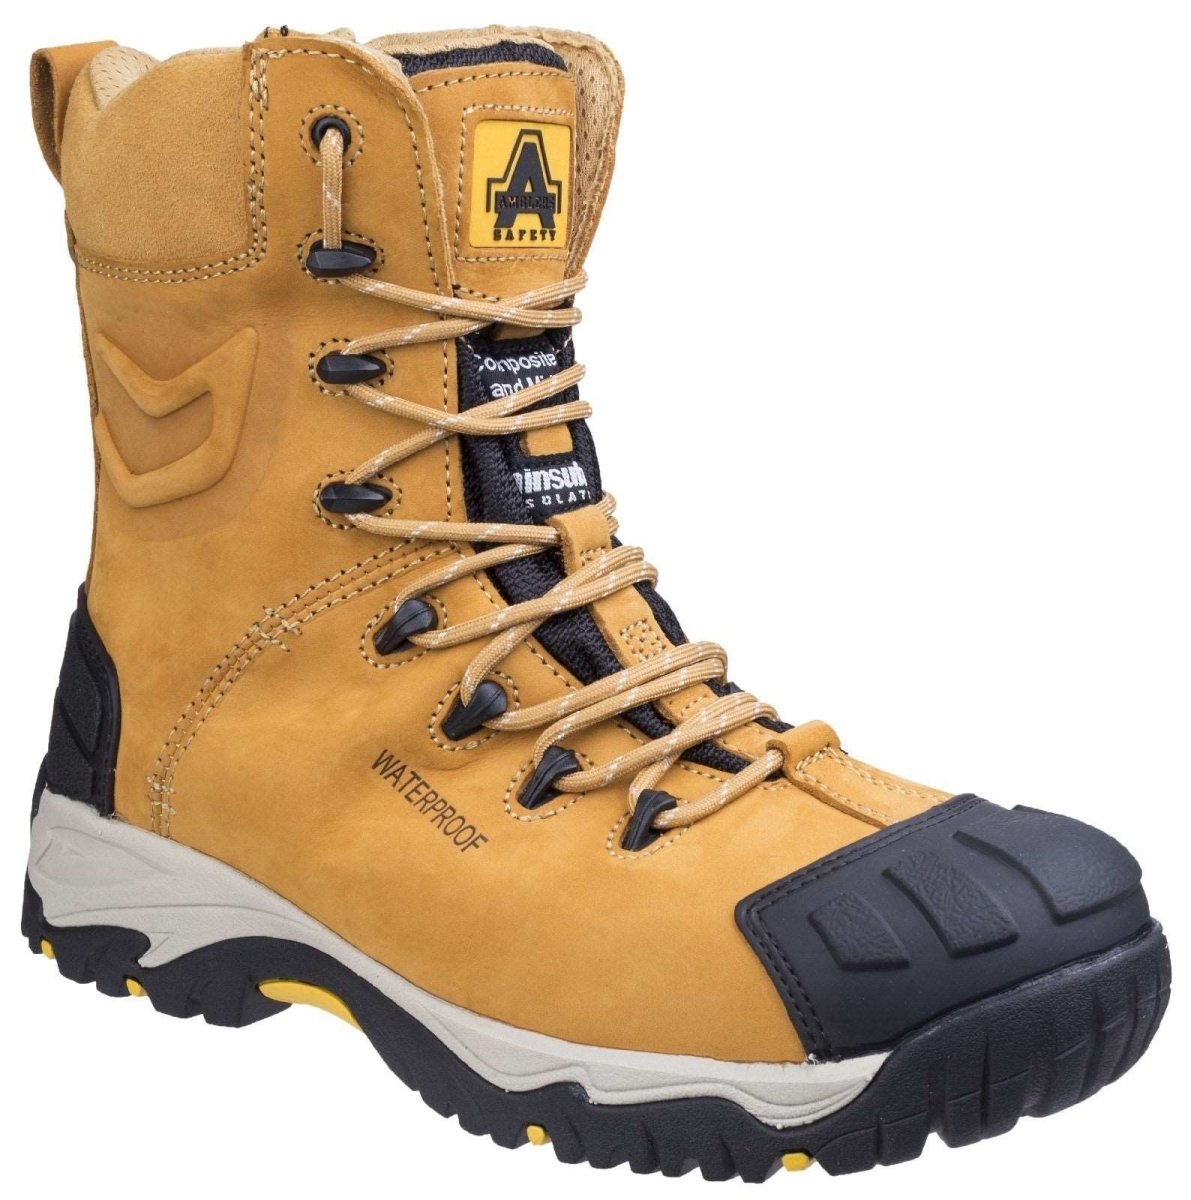 Amblers FS998 Waterproof Composite Safety Boots - Shoe Store Direct